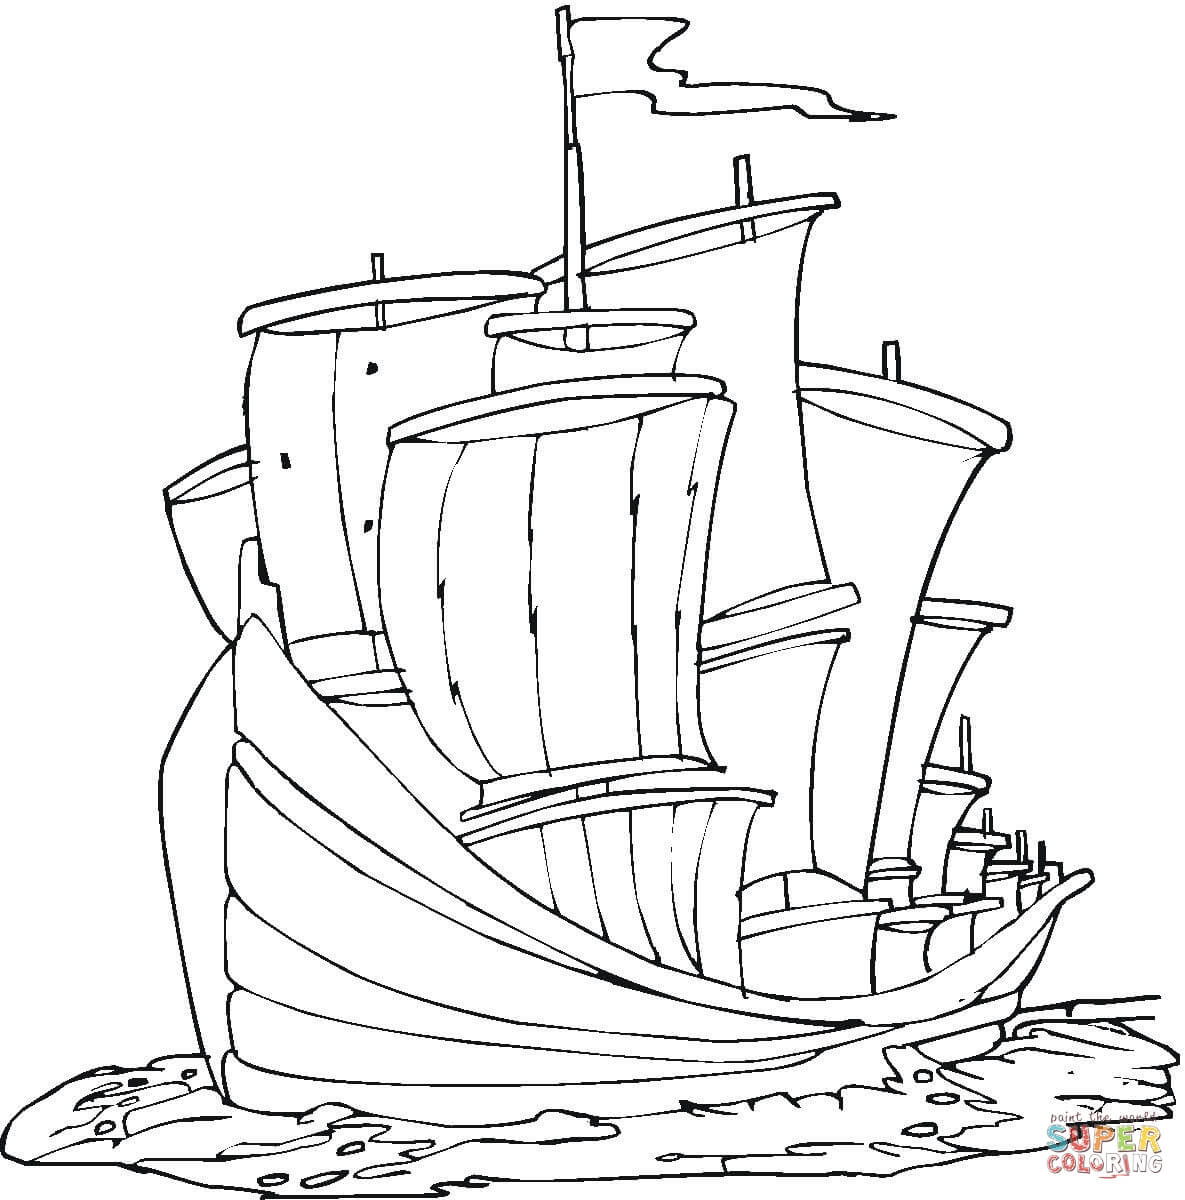 Christopher Columbus Coloring Pages Columbus Day Coloring Pages Free Coloring Pages